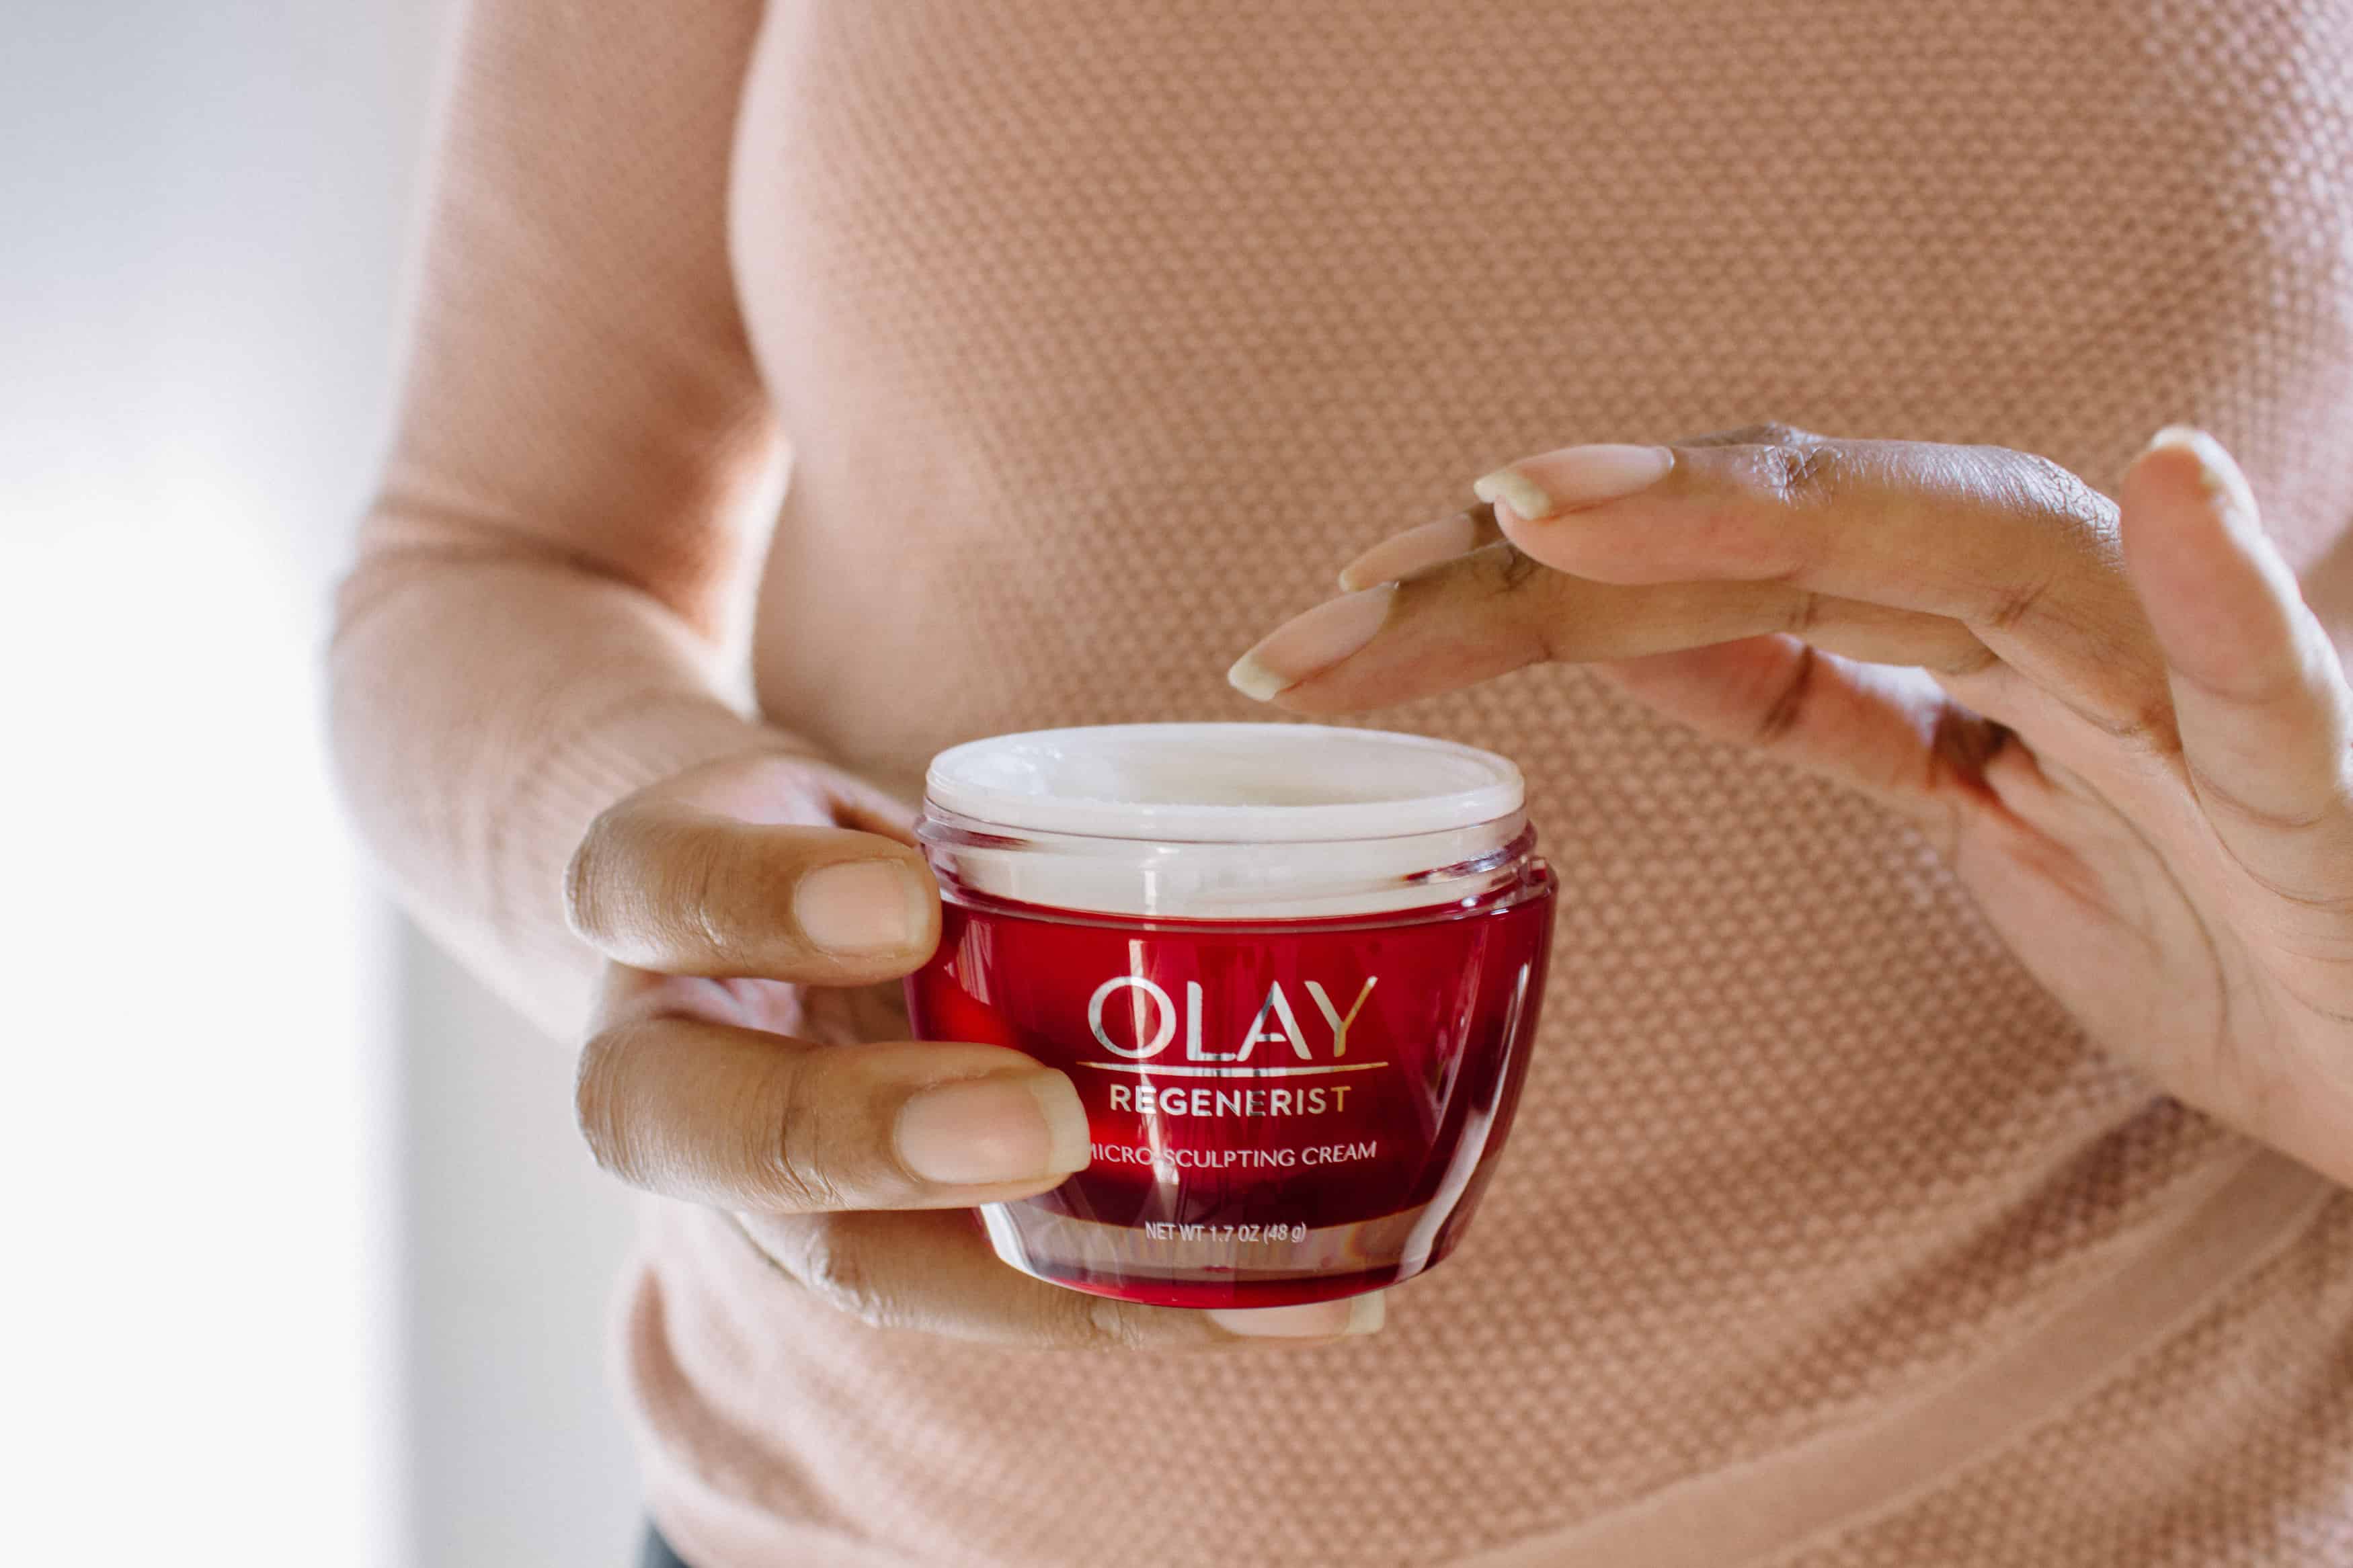 I joined the Olay 28 Day Challenge! I’ll be simplifying my skincare routine for the next 28 days using just two products: Olay Regenerist Micro Sculpting Cream and Olay Eyes Ultimate Eye Cream. Click pin to see the full beauty review! // #ad #Olay28Day @OlayUS